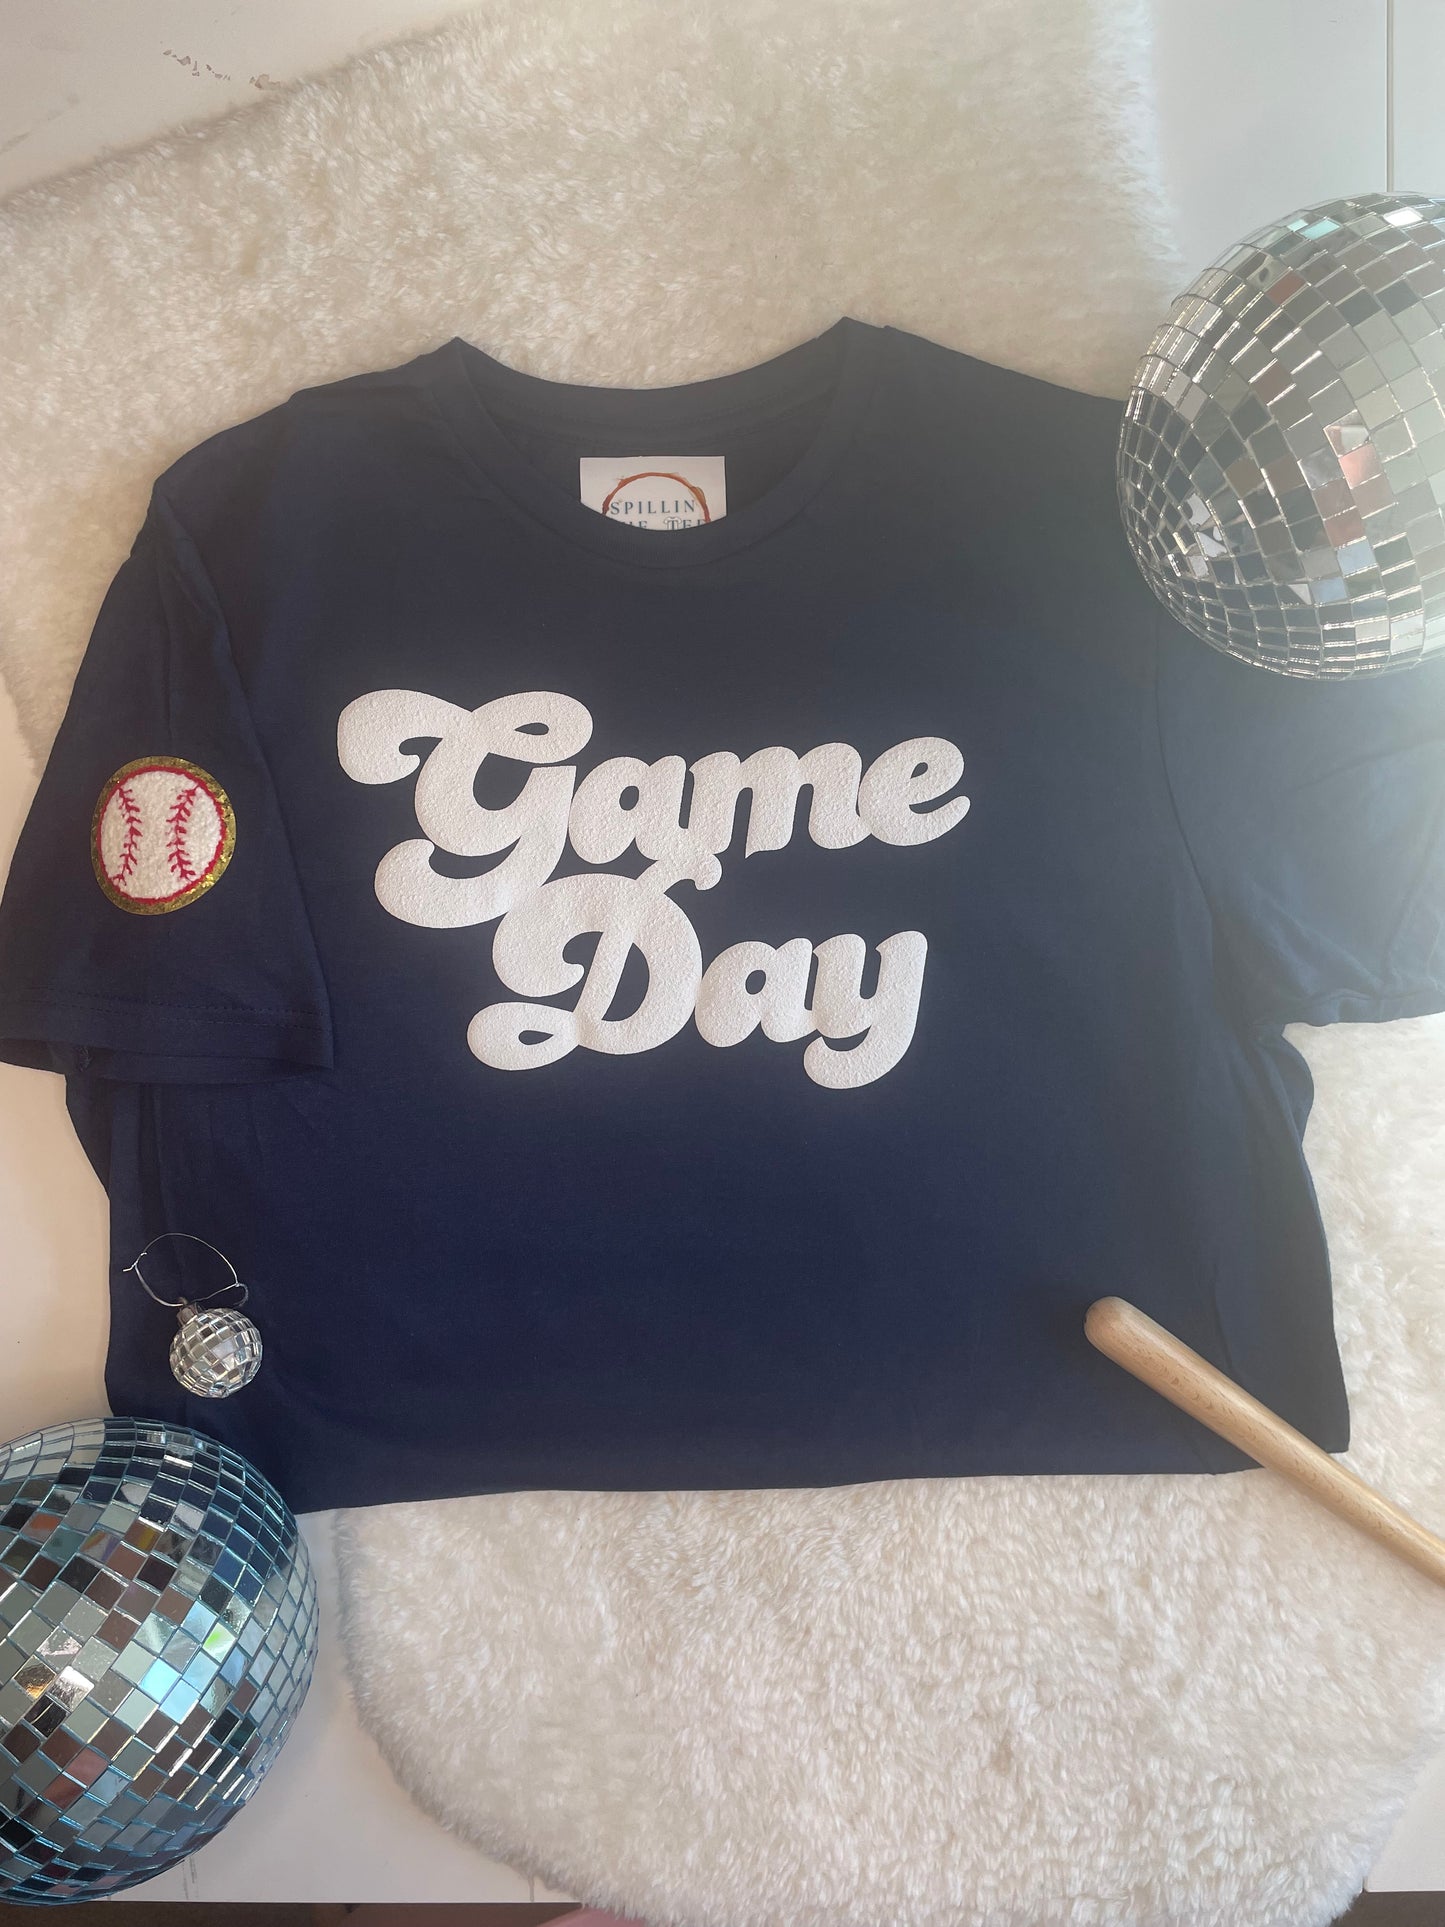 Game Day with chenille baseball tee